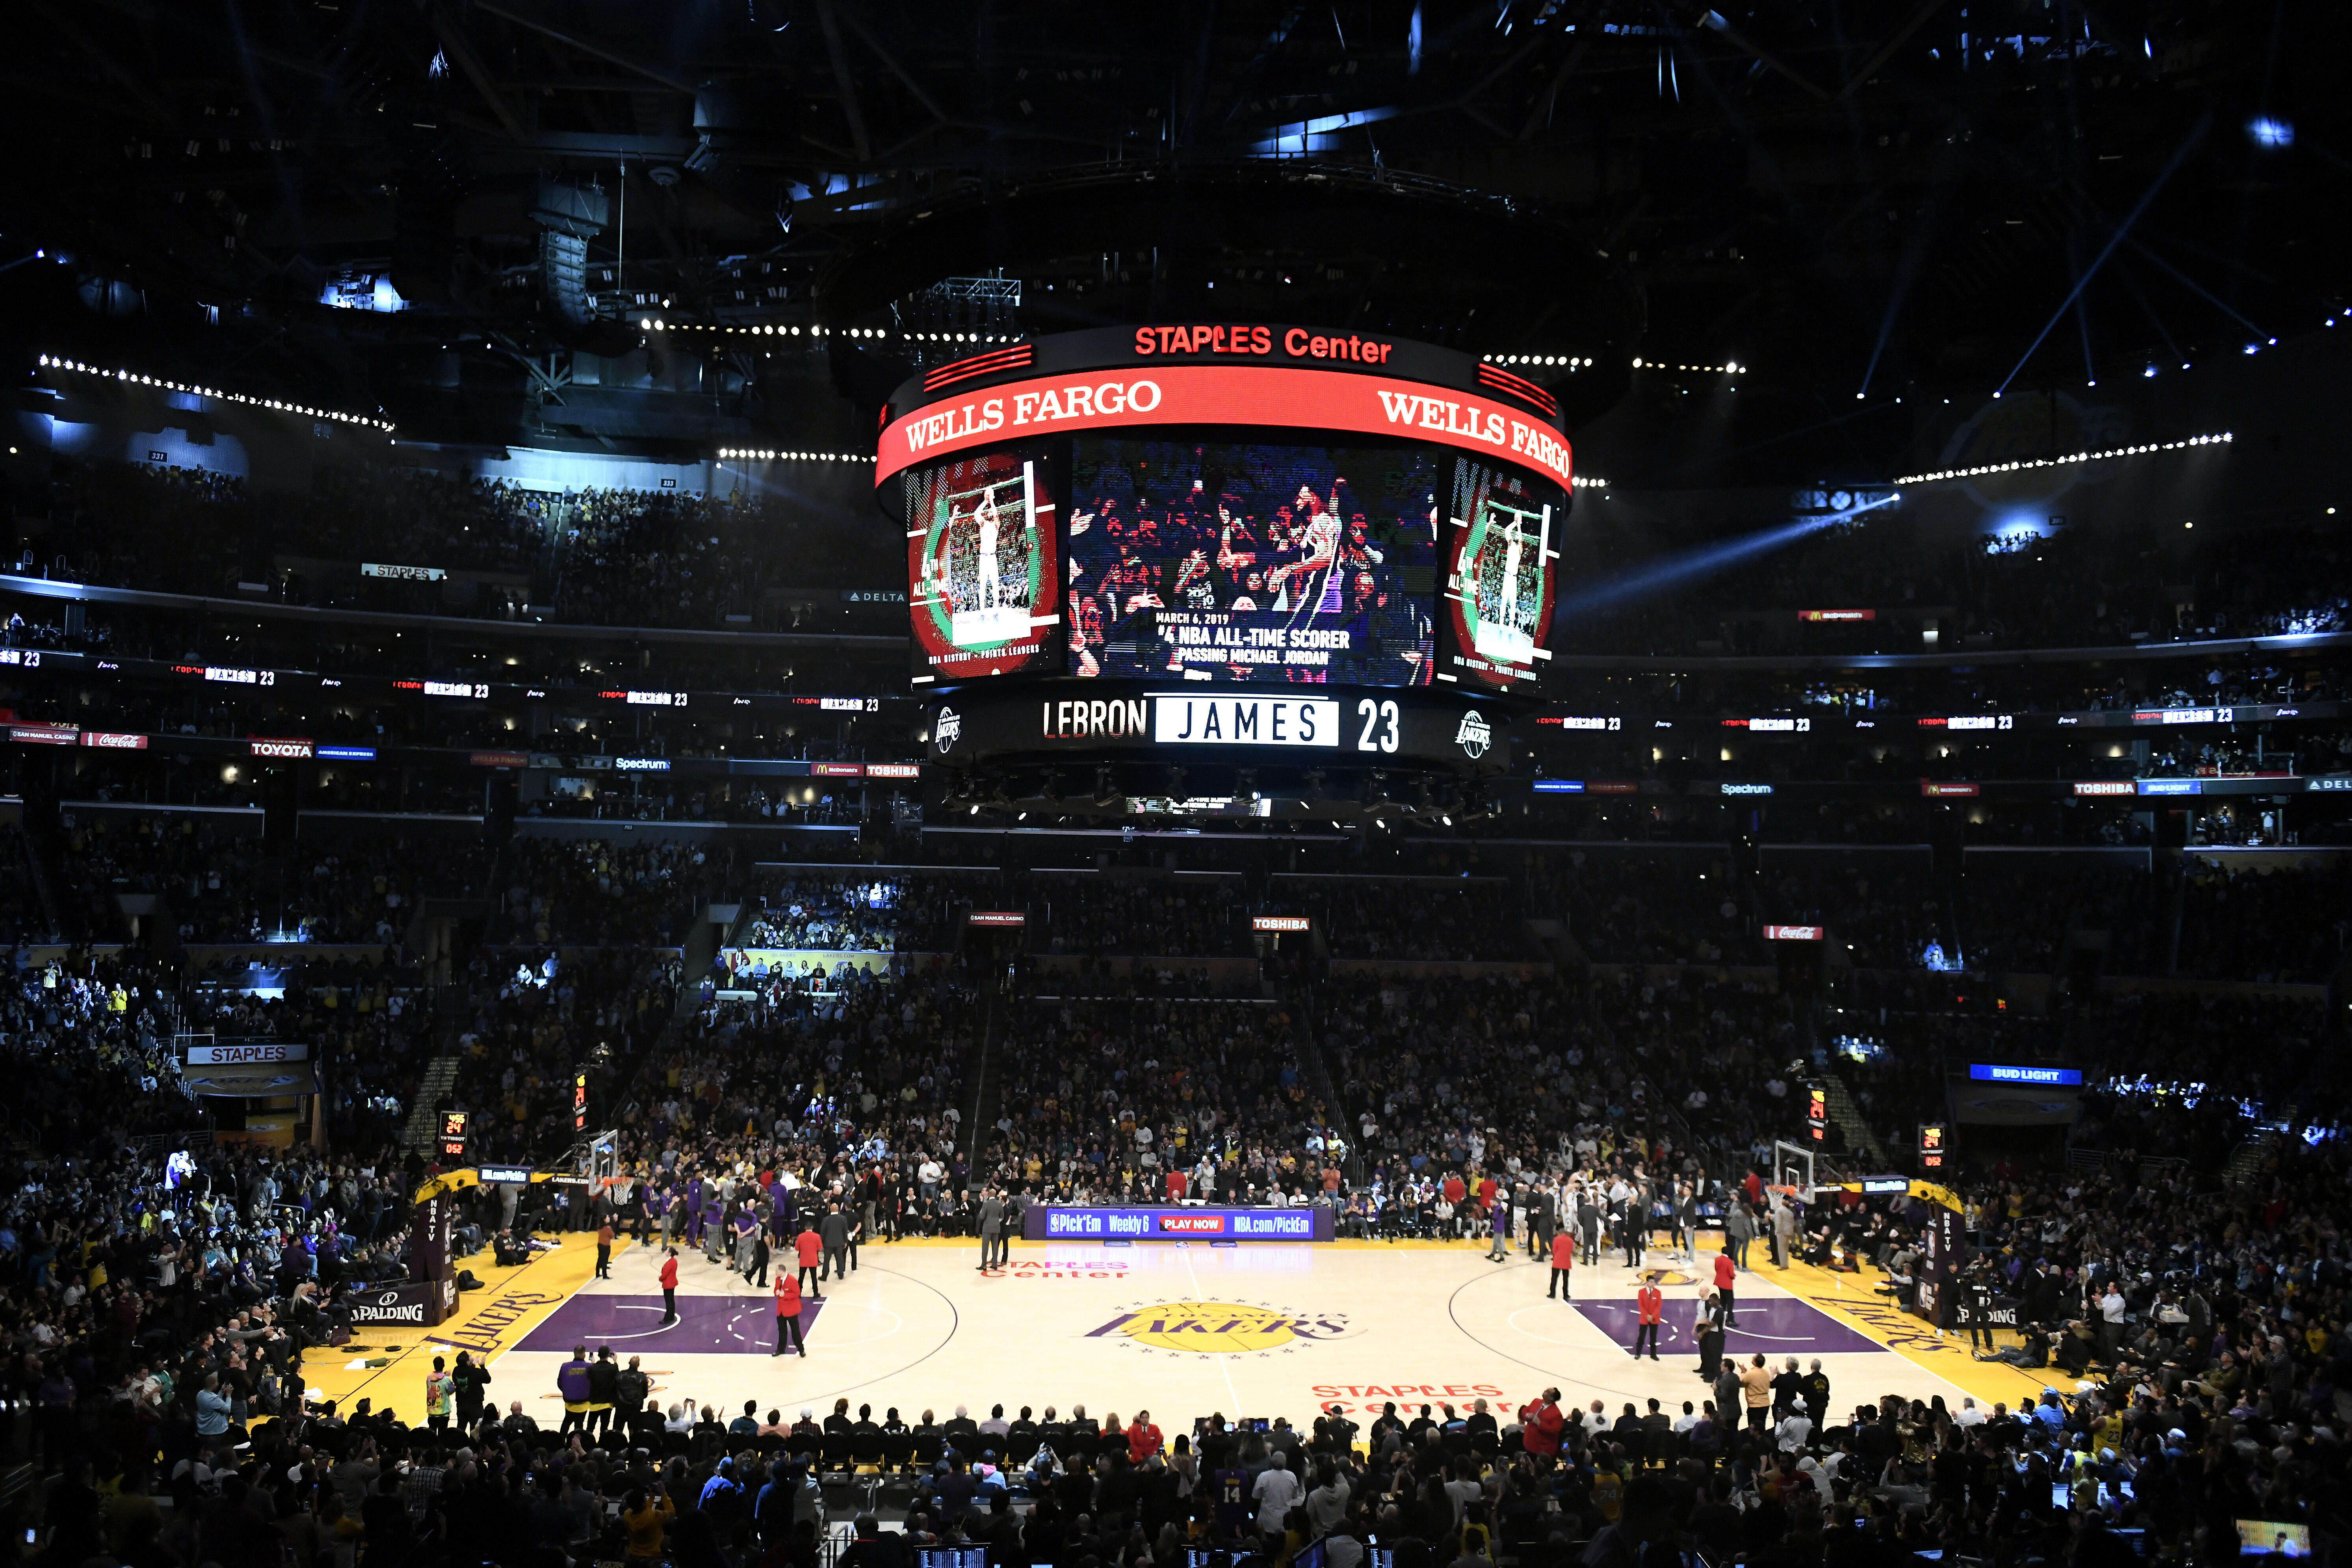 Lakers Considered Moving Back To The Forum After The 2025 Season AM